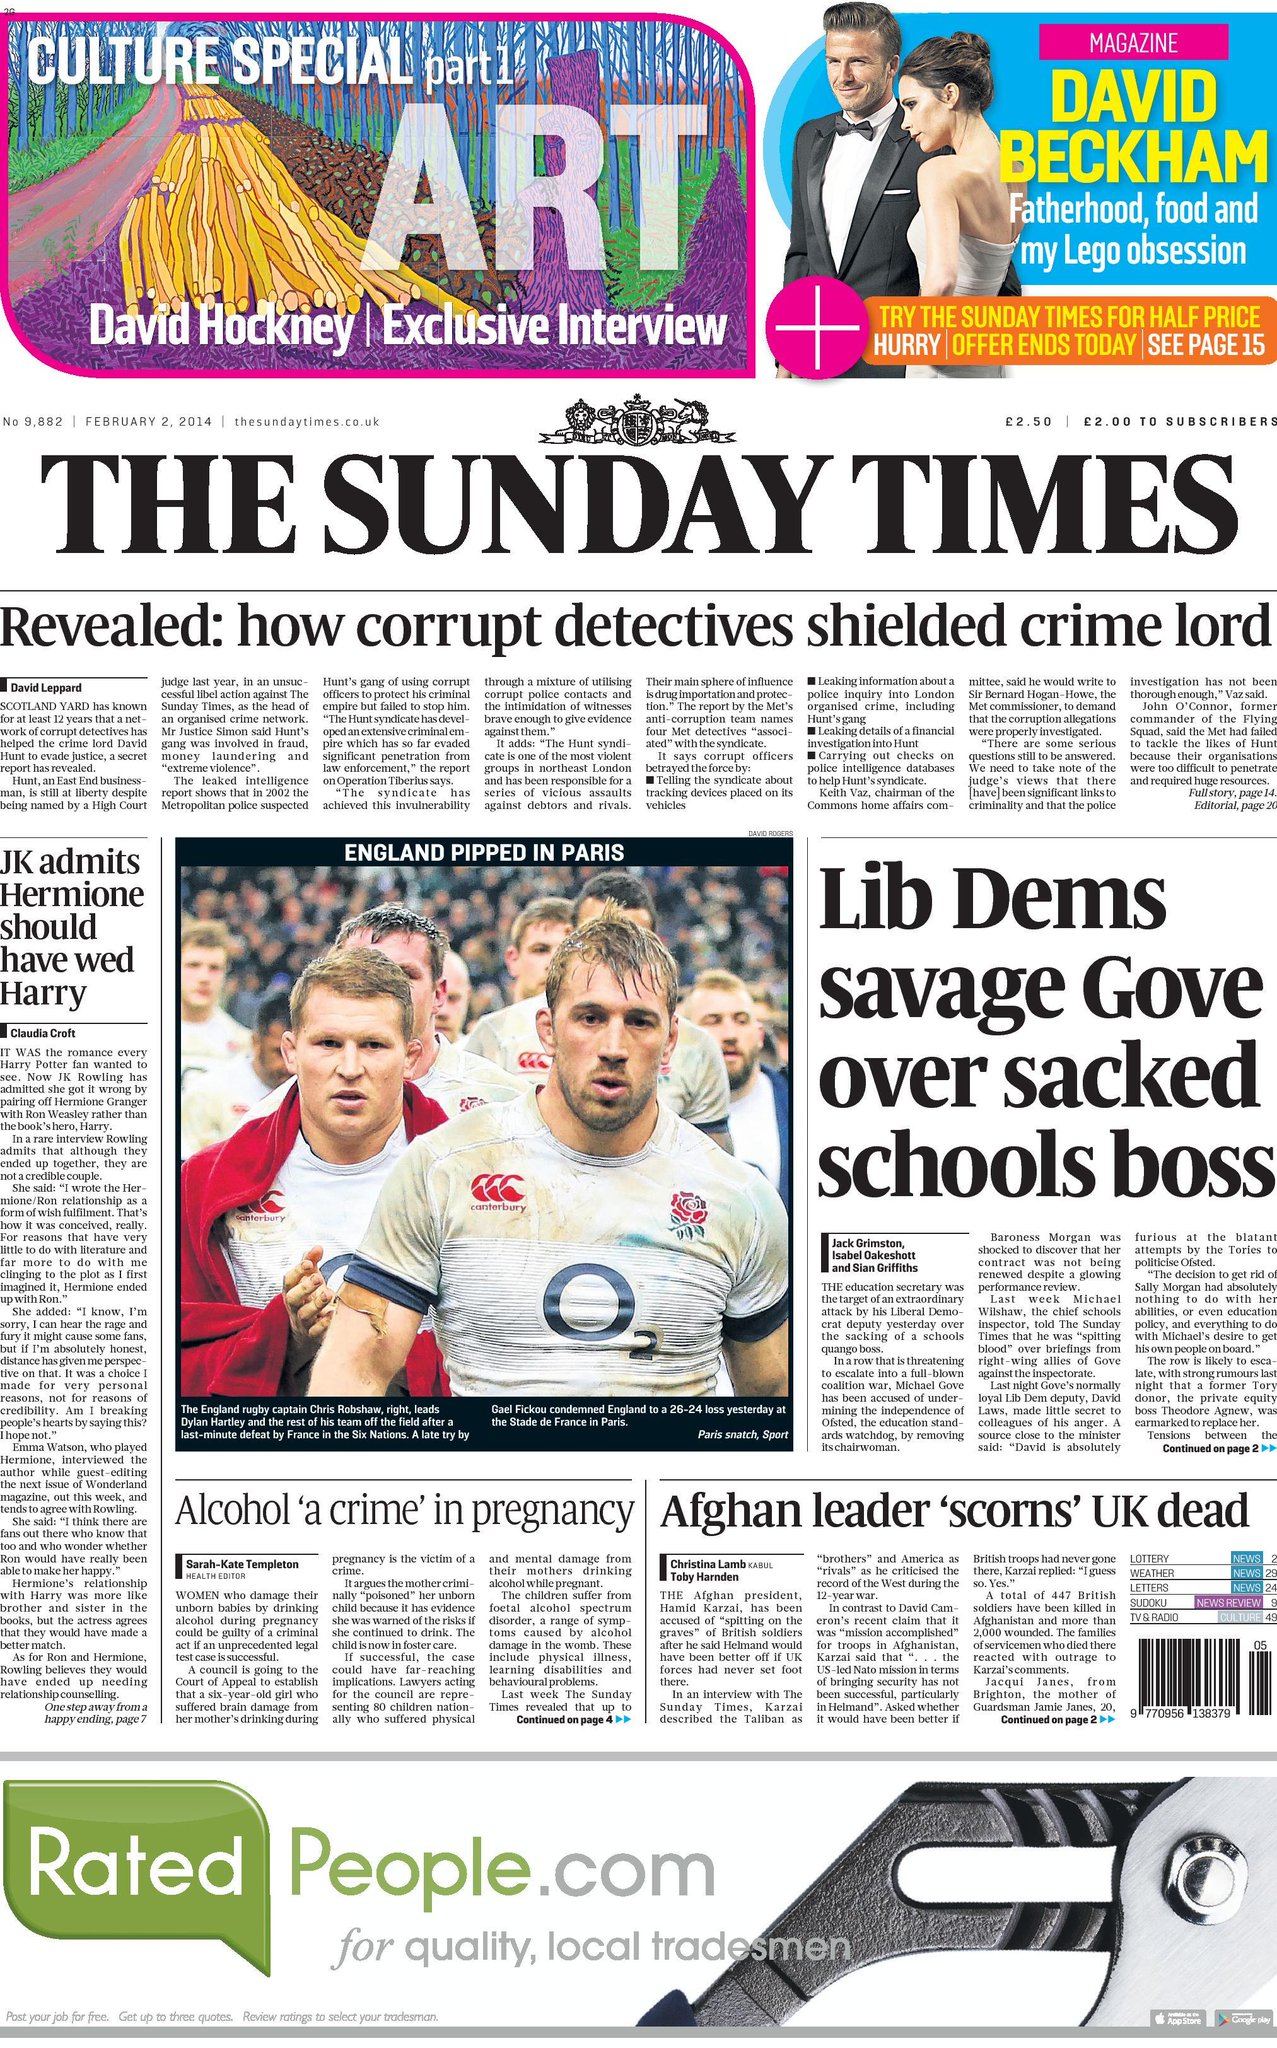 The Sunday Times on Twitter: "Tomorrow's Sunday Times ...